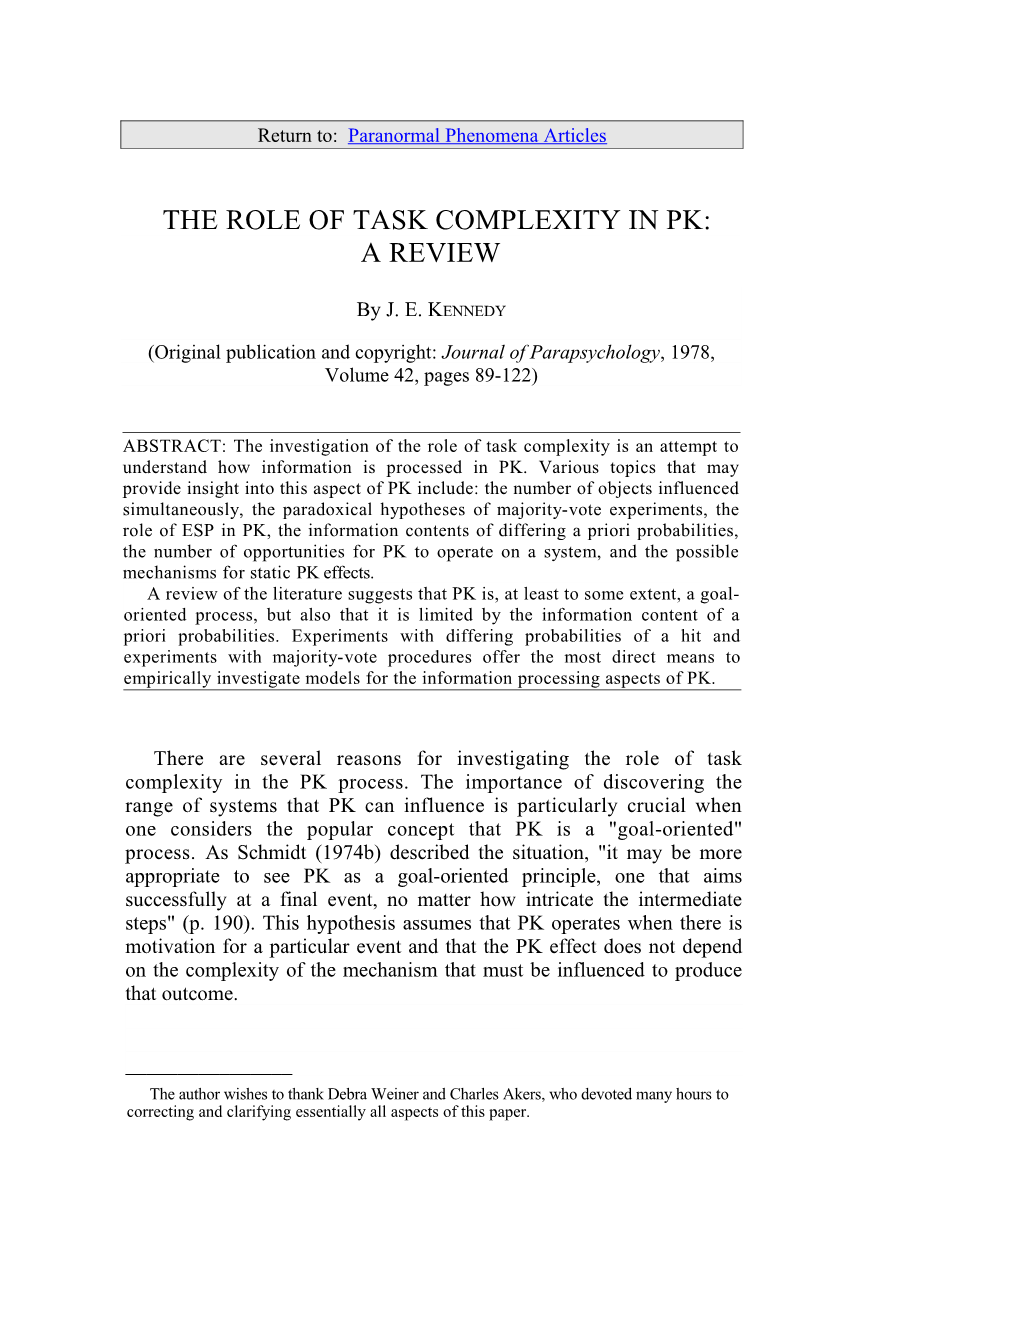 The Role of Task Complexity It PK: a Review